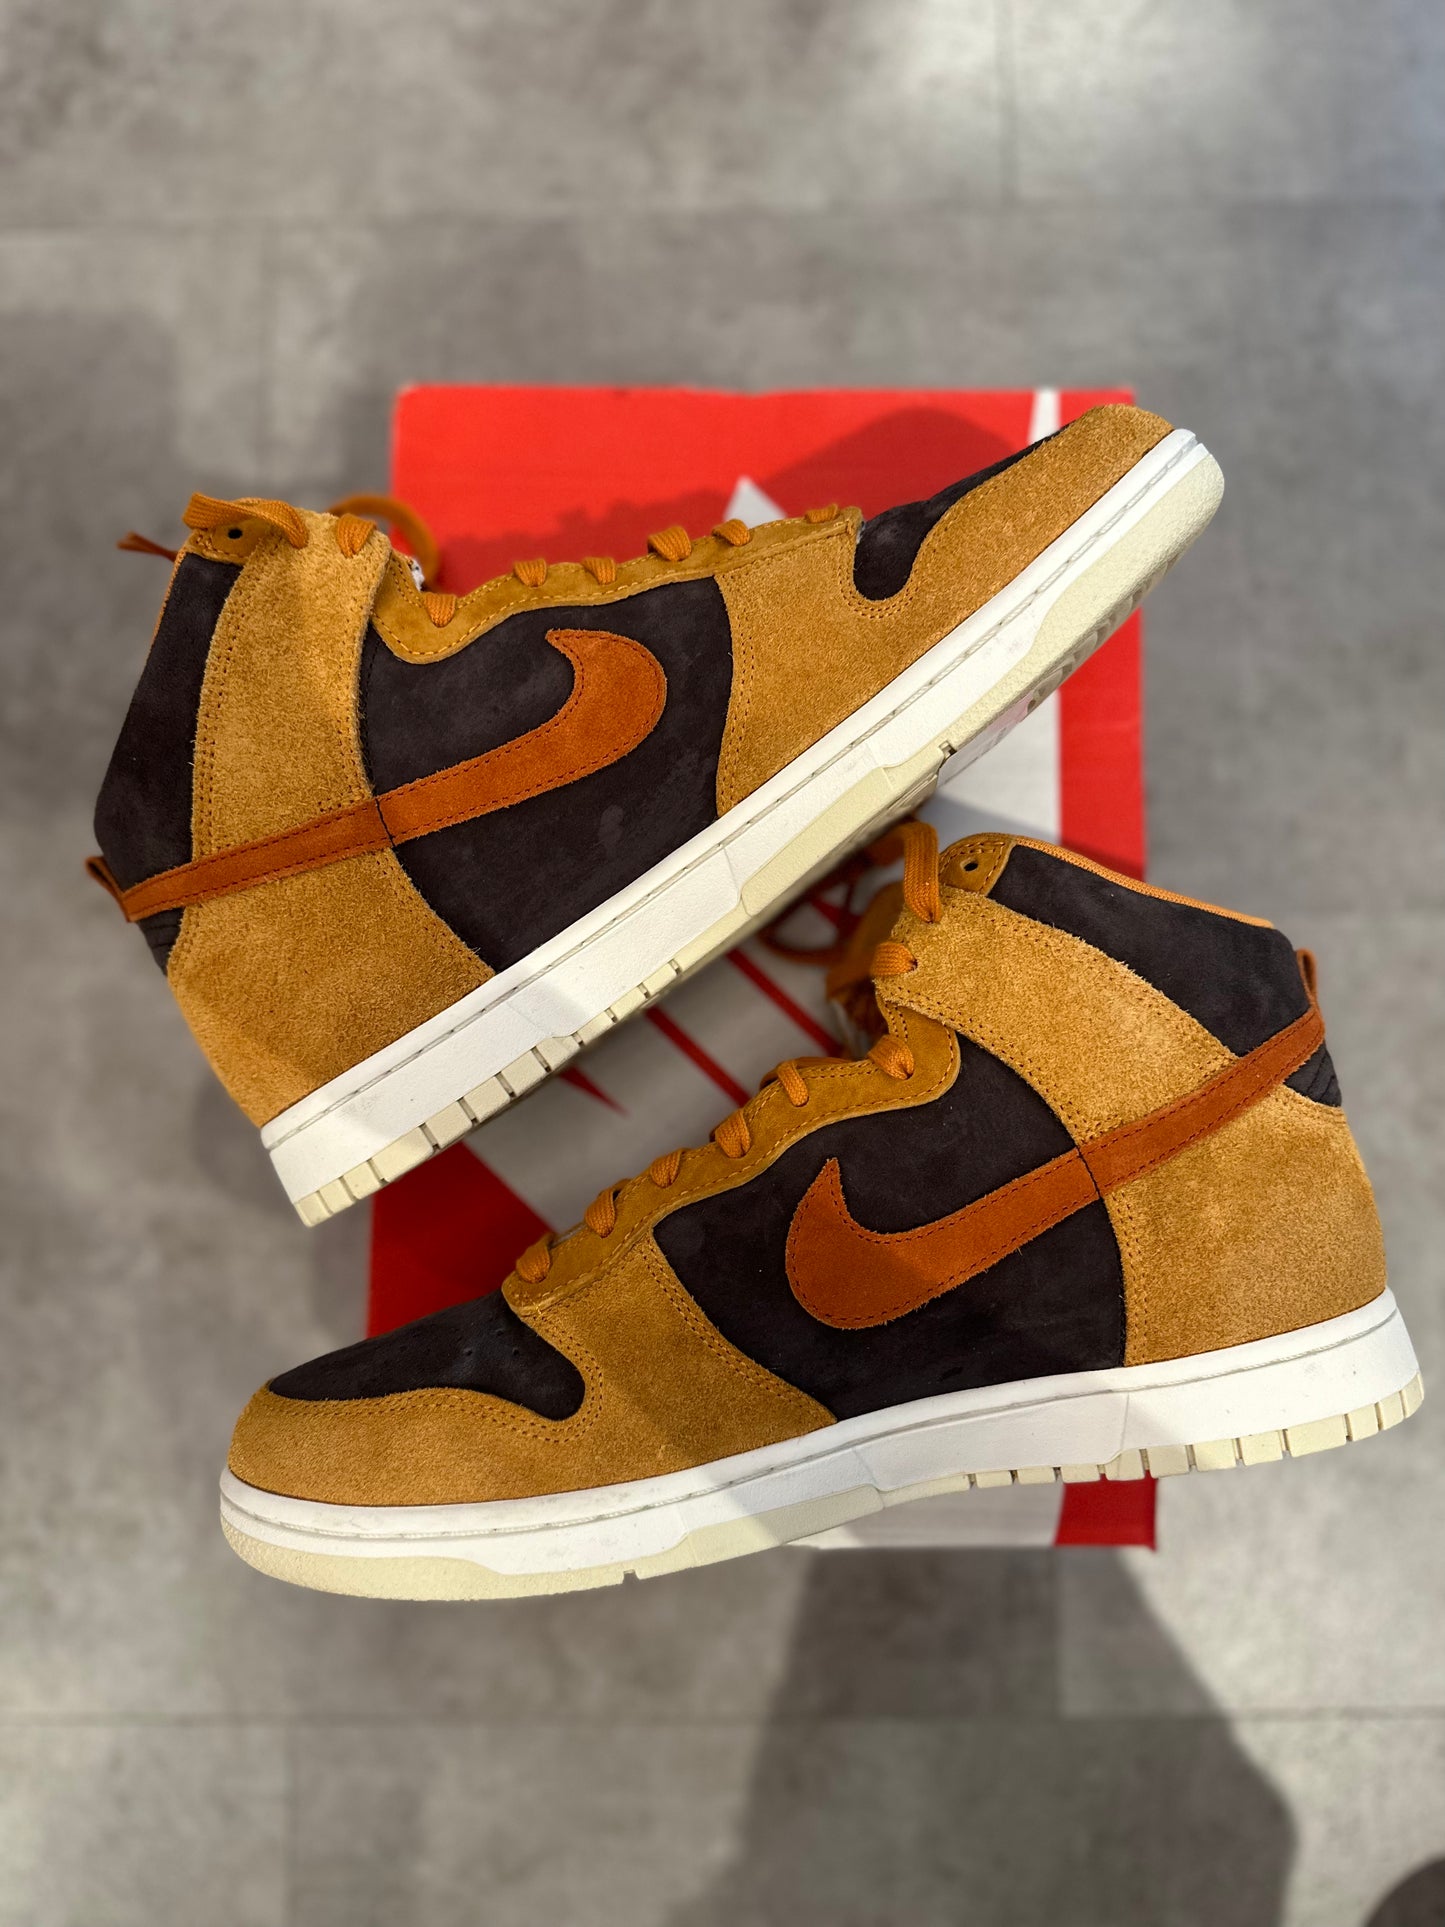 Nike Dunk High PRM Dark Russet (Preowned)